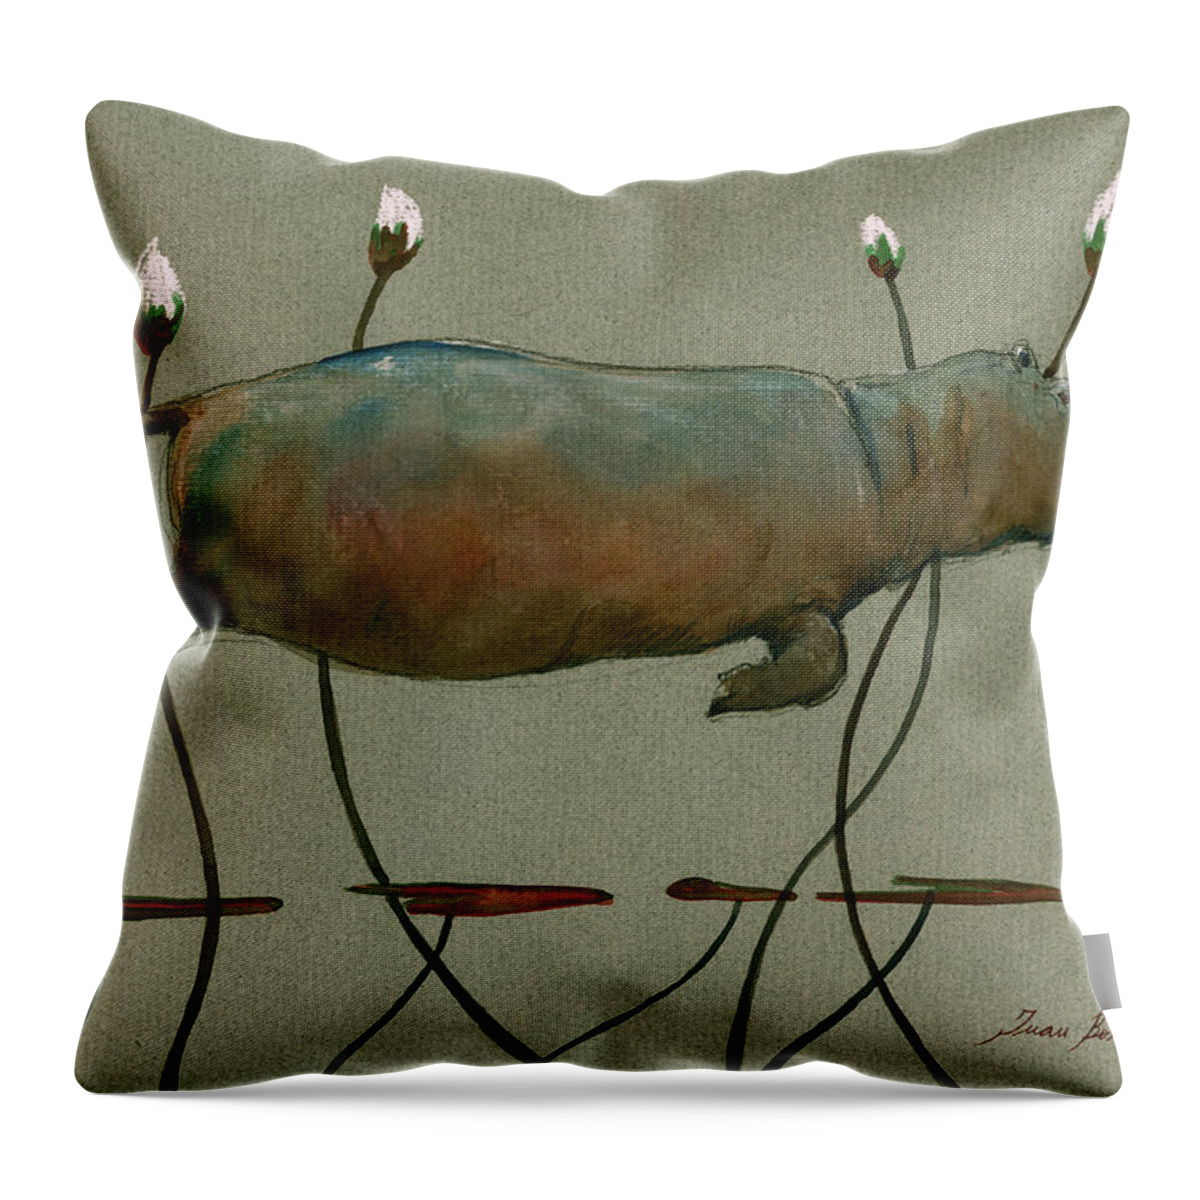 Hippo Throw Pillow featuring the painting Happy hippo swimming by Juan Bosco